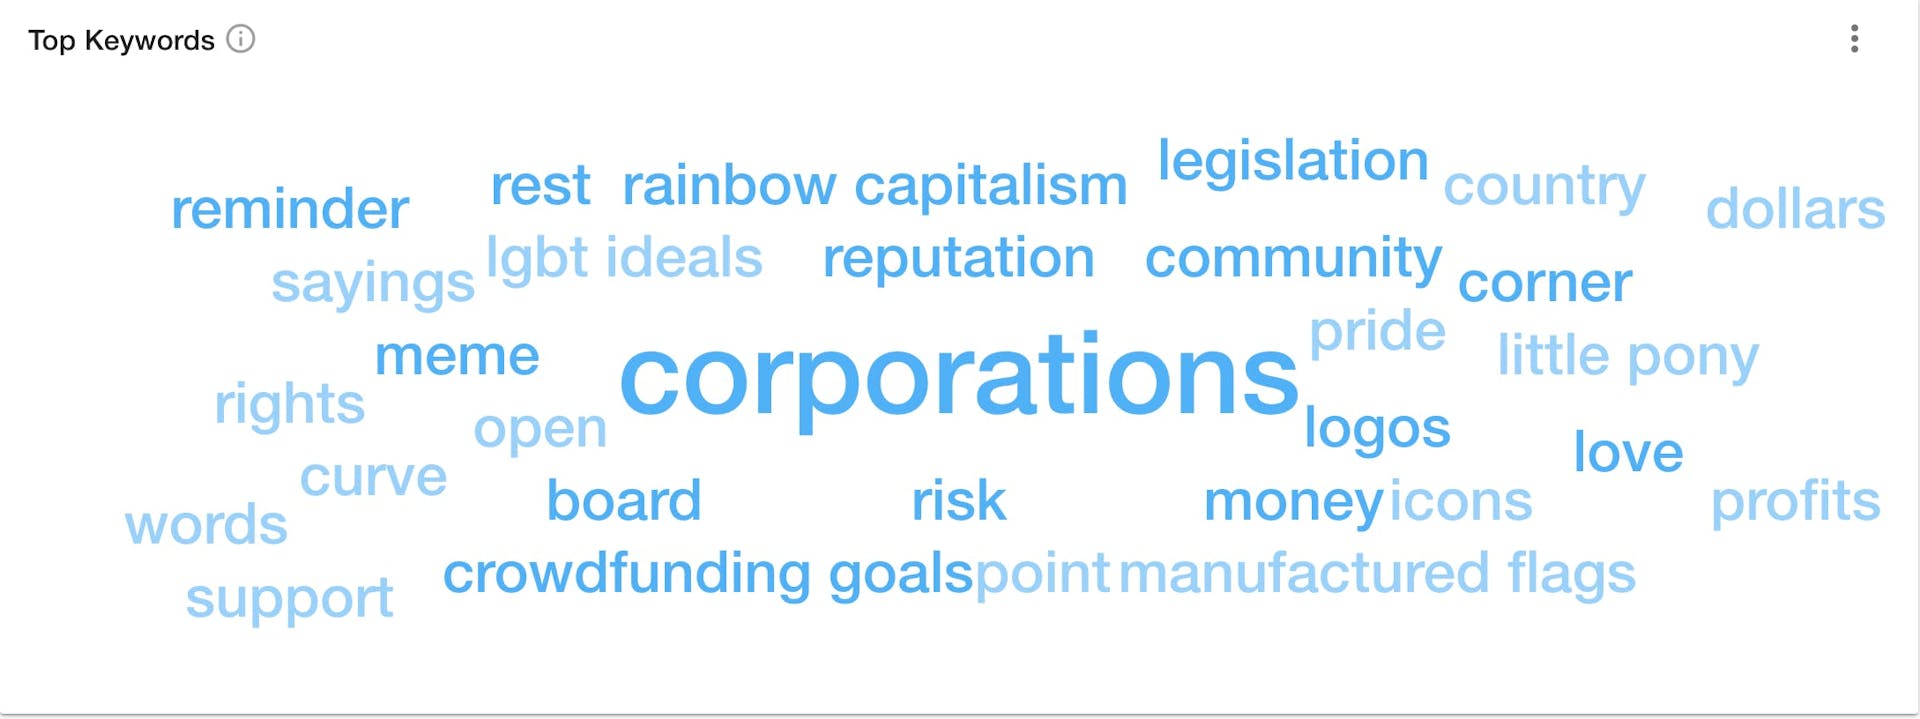 A keyword cloud from the Explore platform shows the word "corporations" largest in darkest blue, surrounded by smaller, lighter blue words including rainbow capitalism, logos, legislation, crowdfunding goals, and community.